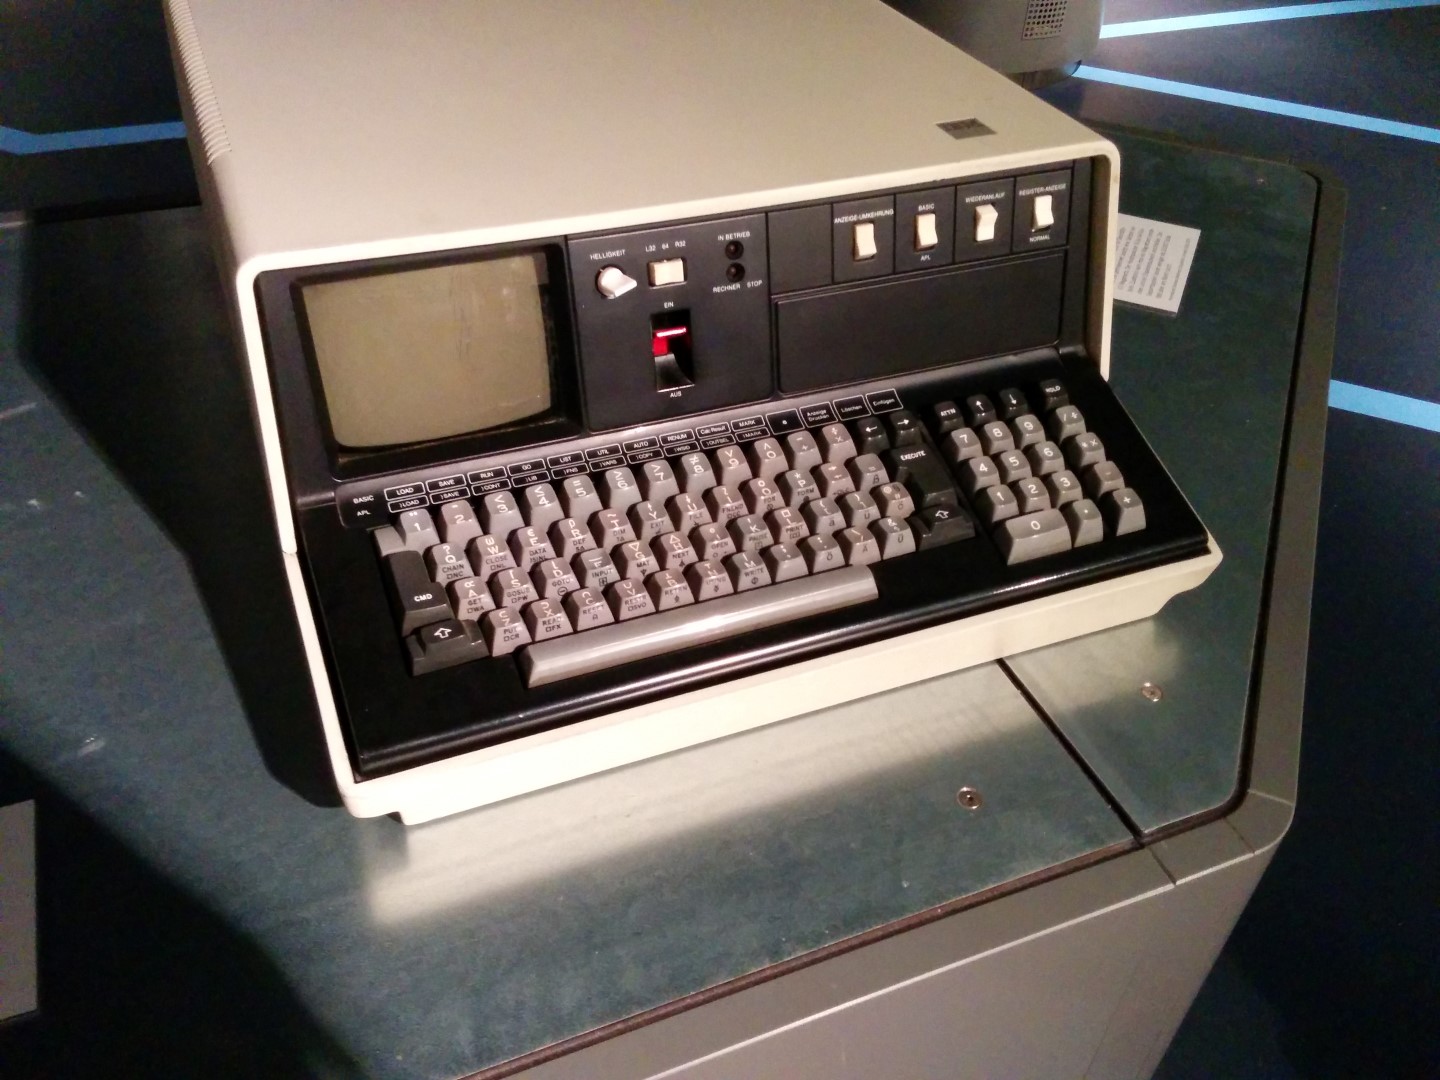 1978: IBM 5110 small computer, 1.9 MHz, 16 to 64 MB RAM. Price: $18,000. Unsuccessful, but IBM did make &quot;personal&quot; computers as early as that.